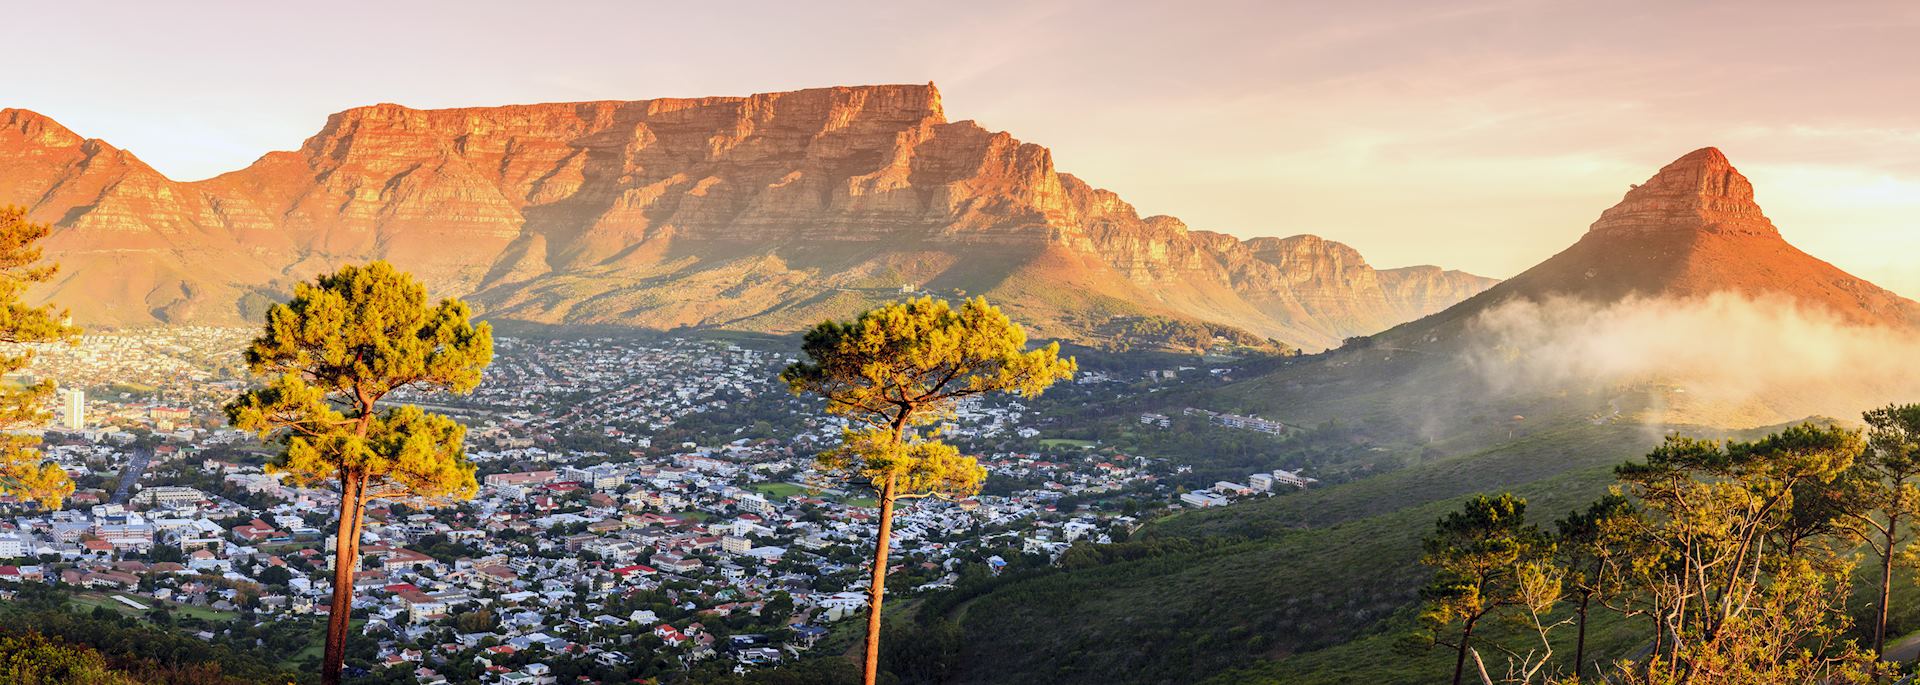 Table Mountain and Lions Head